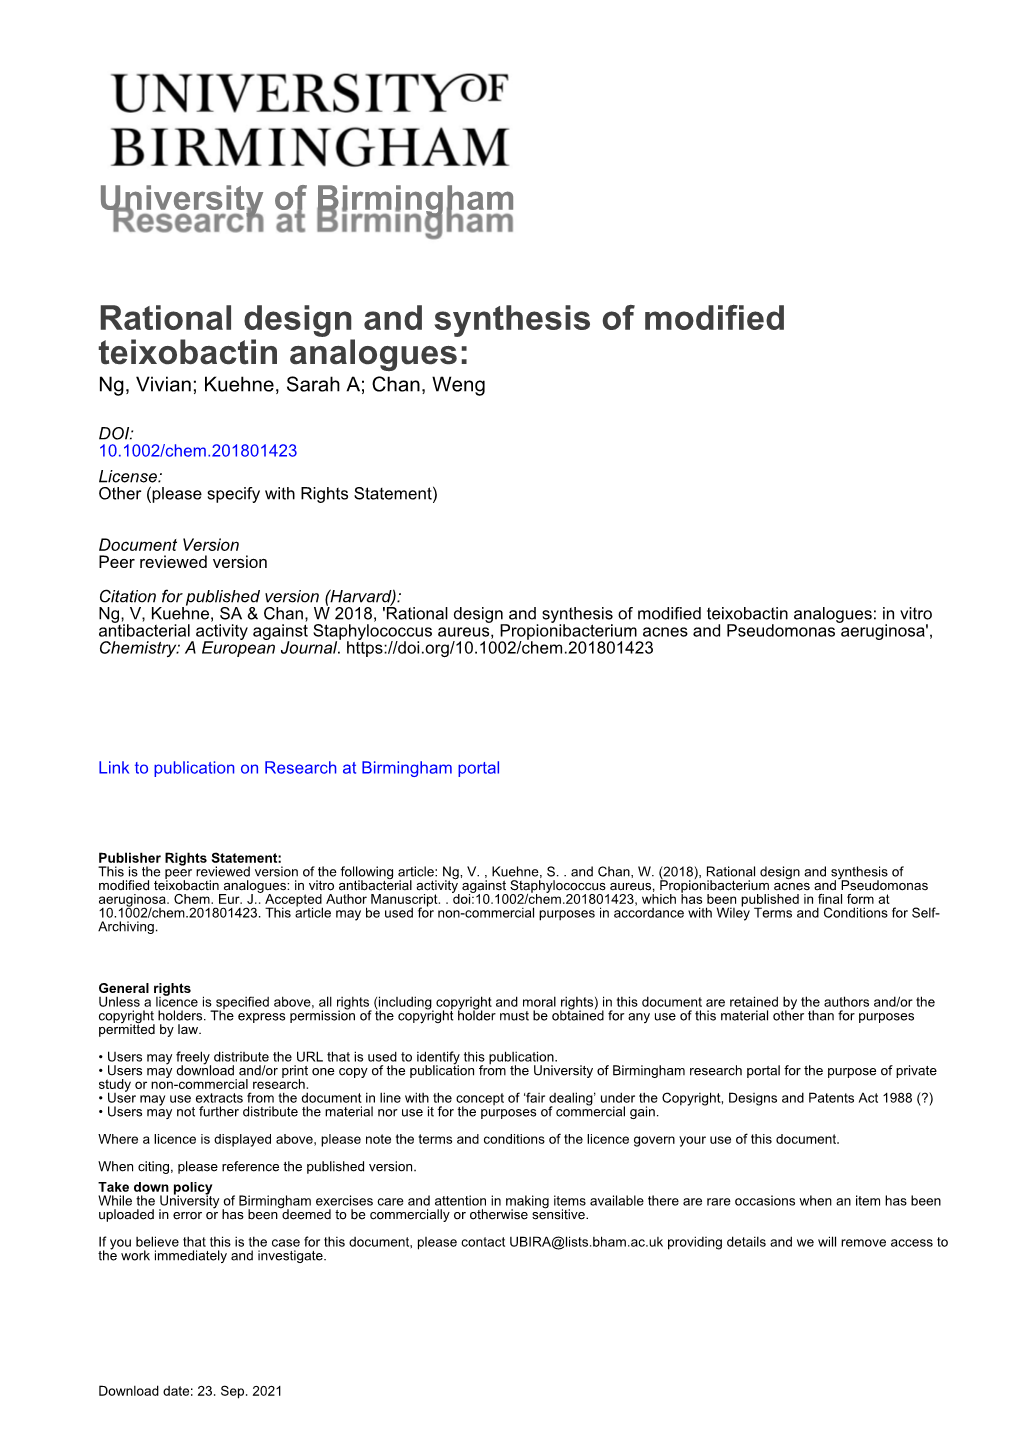 Rational Design and Synthesis of Modified Teixobactin Analogues: In